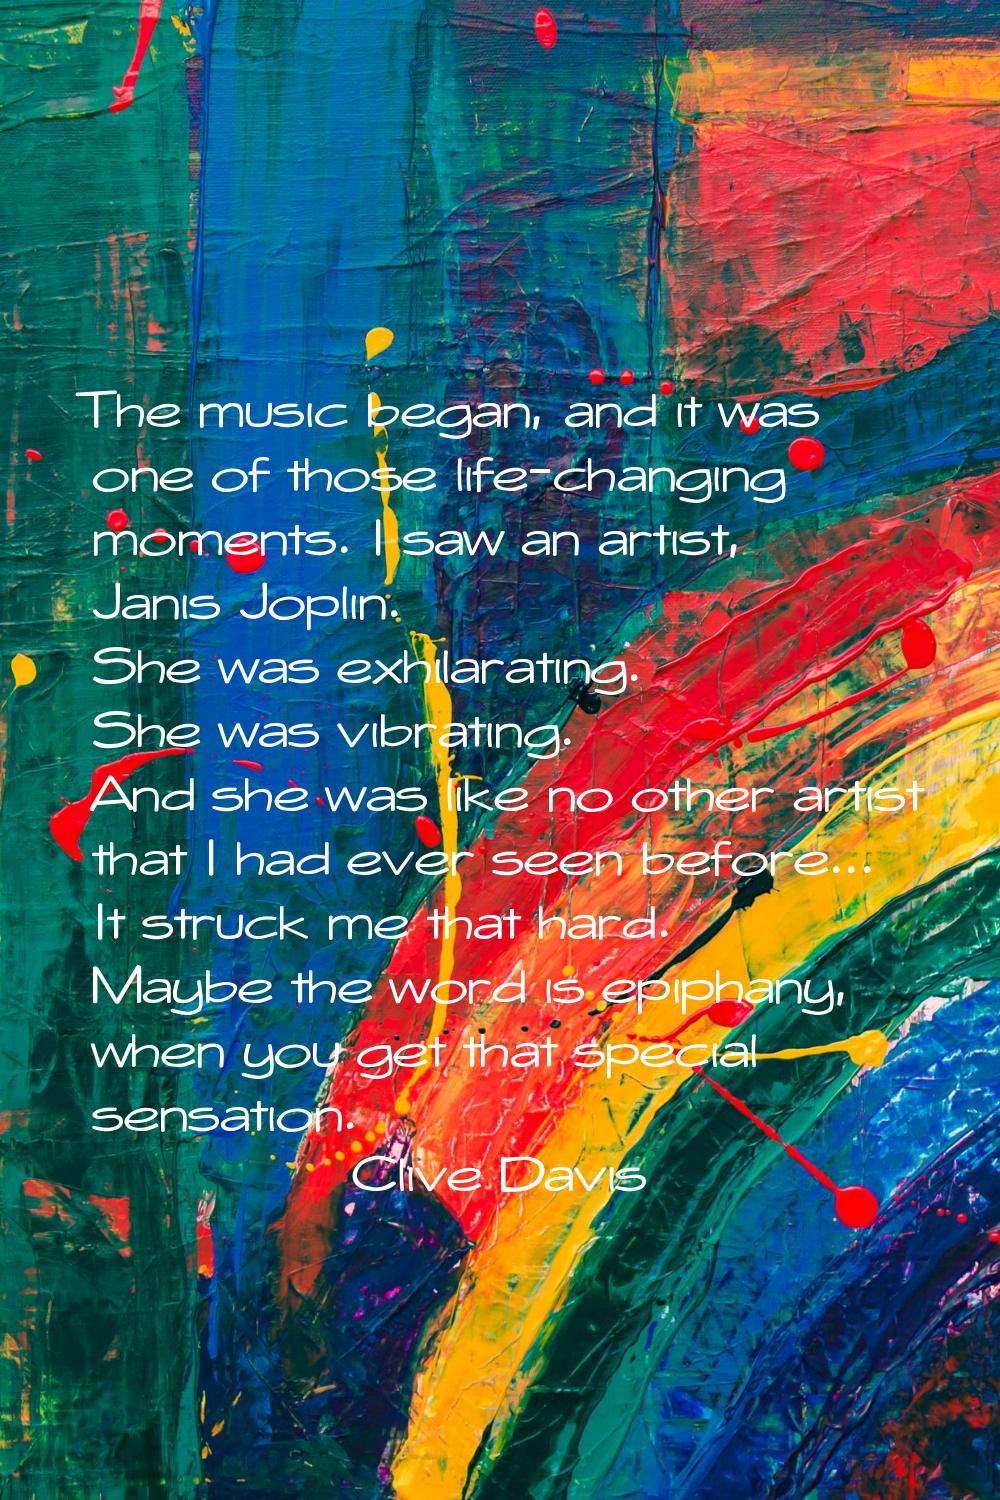 The music began, and it was one of those life-changing moments. I saw an artist, Janis Joplin. She 